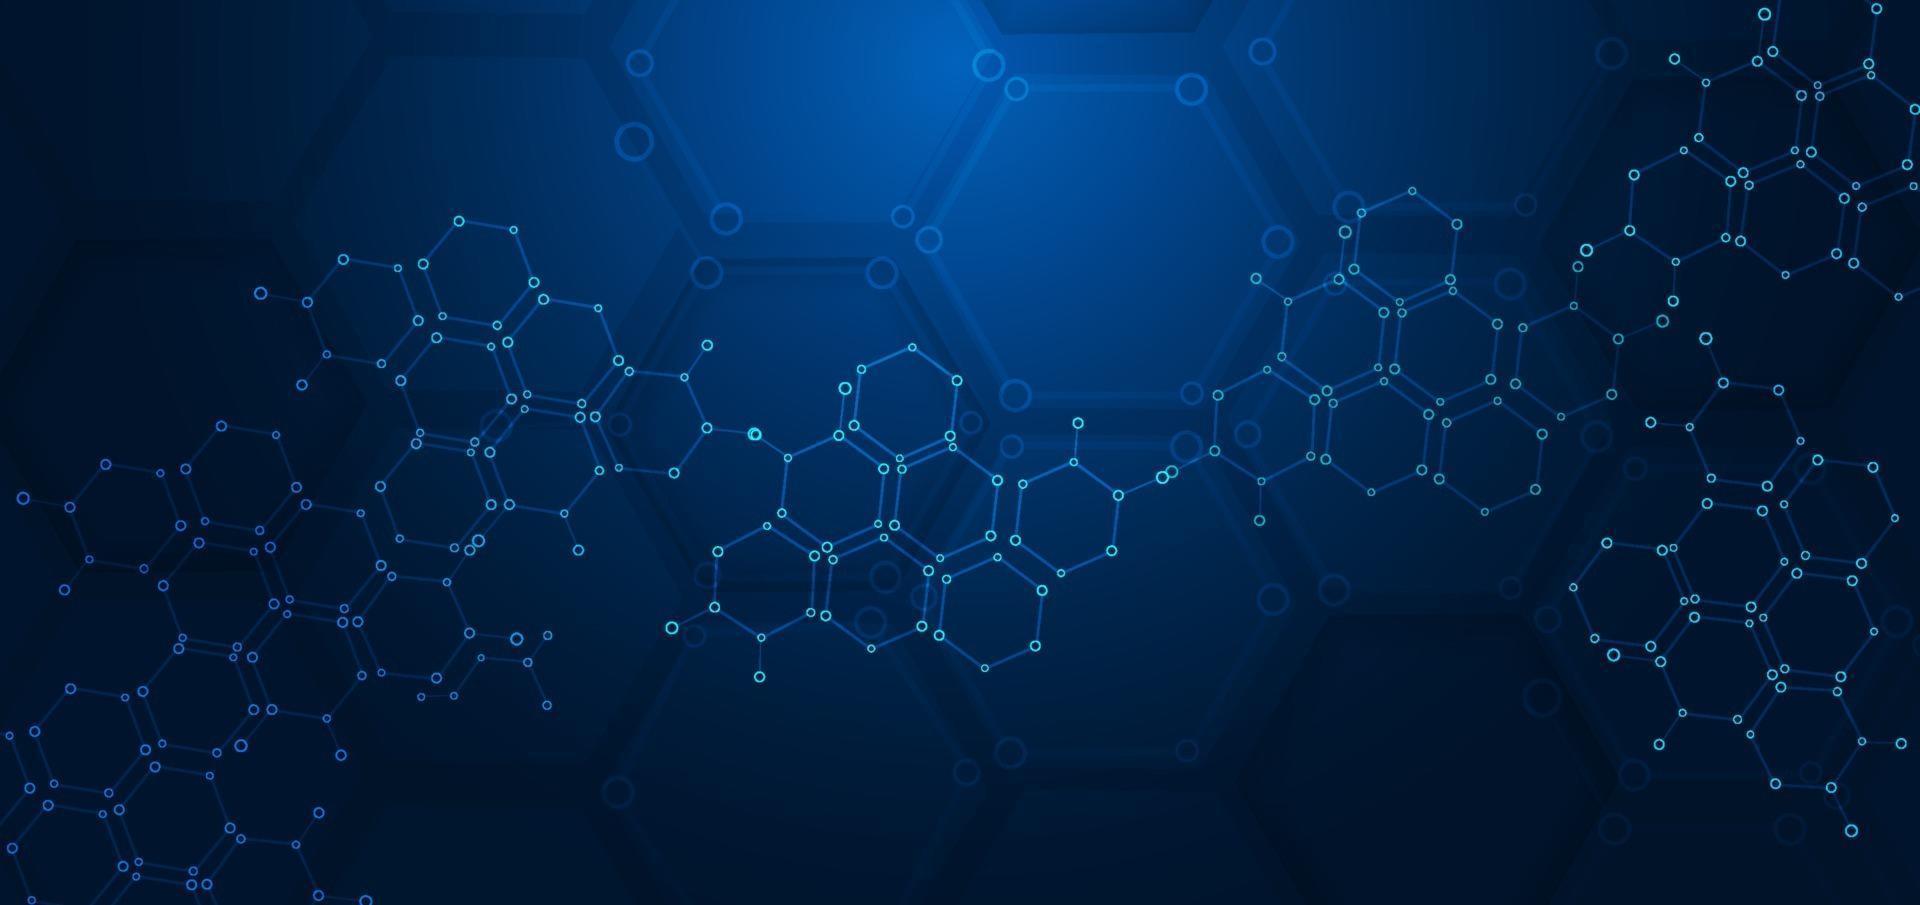 Abstract hexagon pattern dark blue background. Medical and science concept. Molecular structures. vector